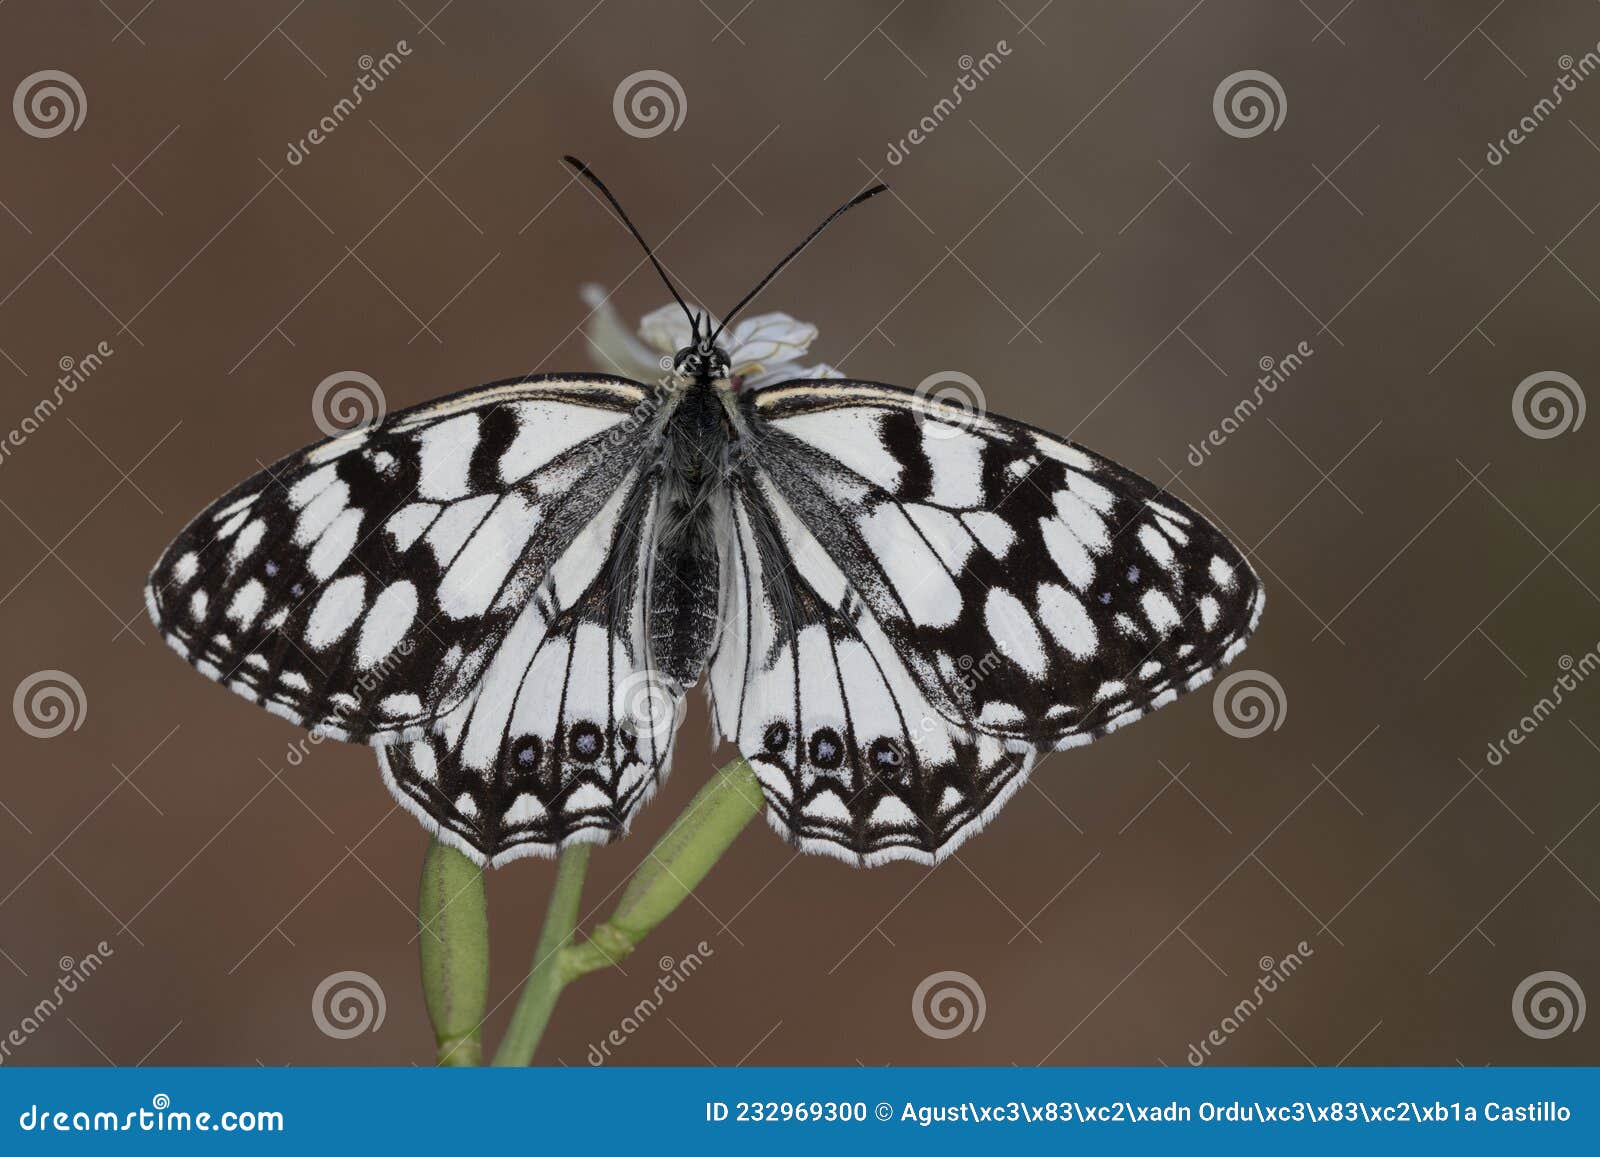 day butterfly perched on flower, melanargia ines.